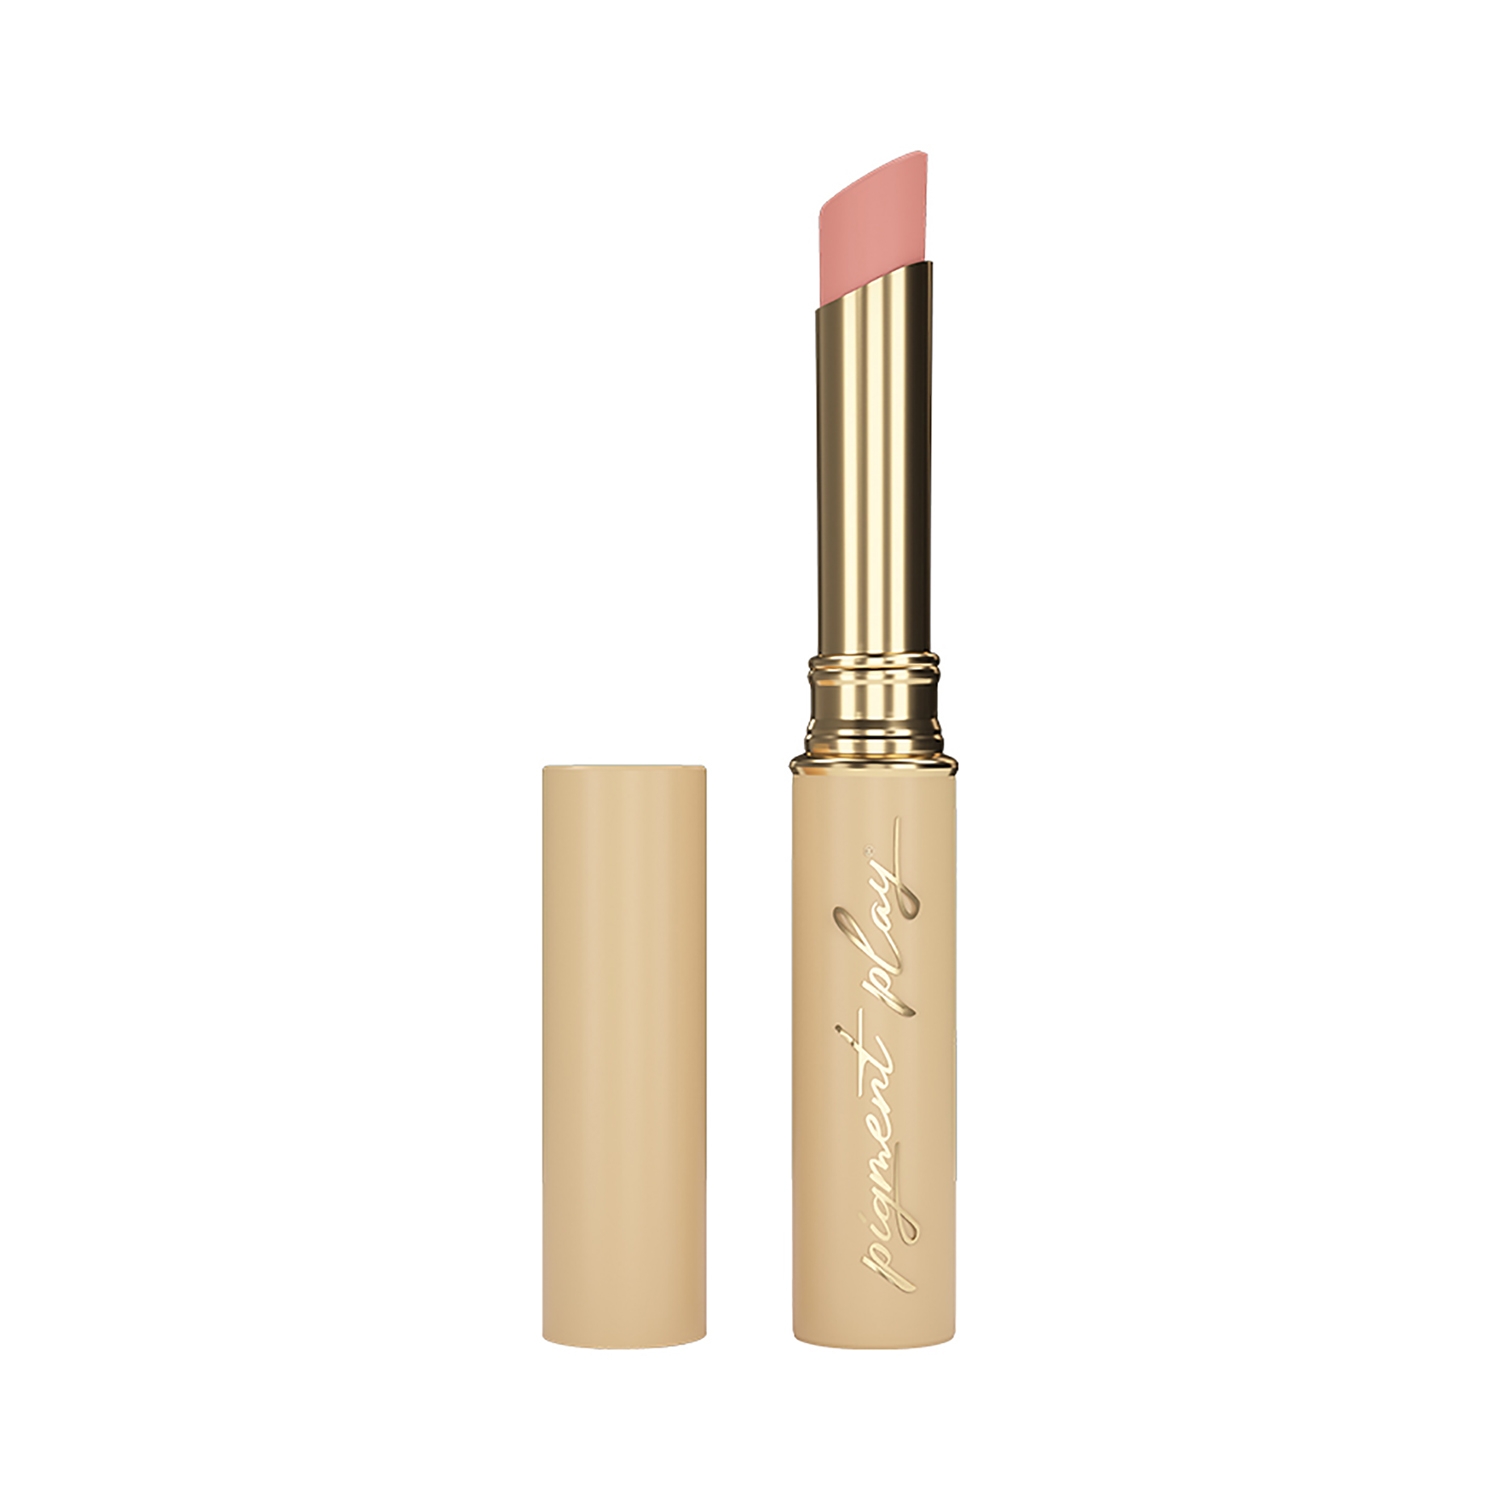 Pigment Play | Pigment Play Performer Matte Lipstick - Fancy Me (2.9g)